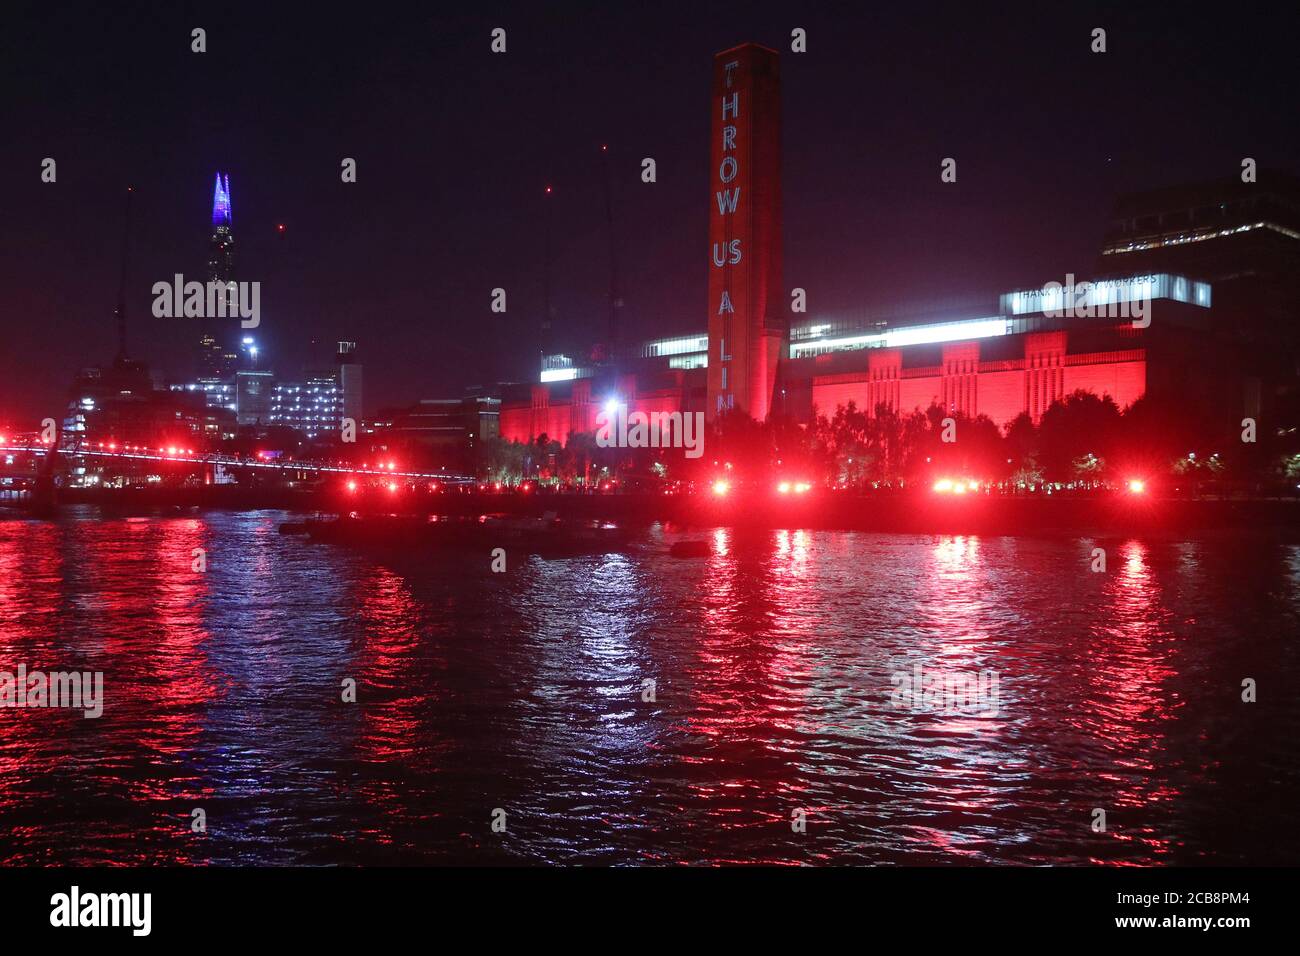 The Tate Modern lit up in red to raise awareness for over a million jobs in the entertainment industry that are at risk of being lost without financial support from the government following the coronavirus outbreak. Stock Photo